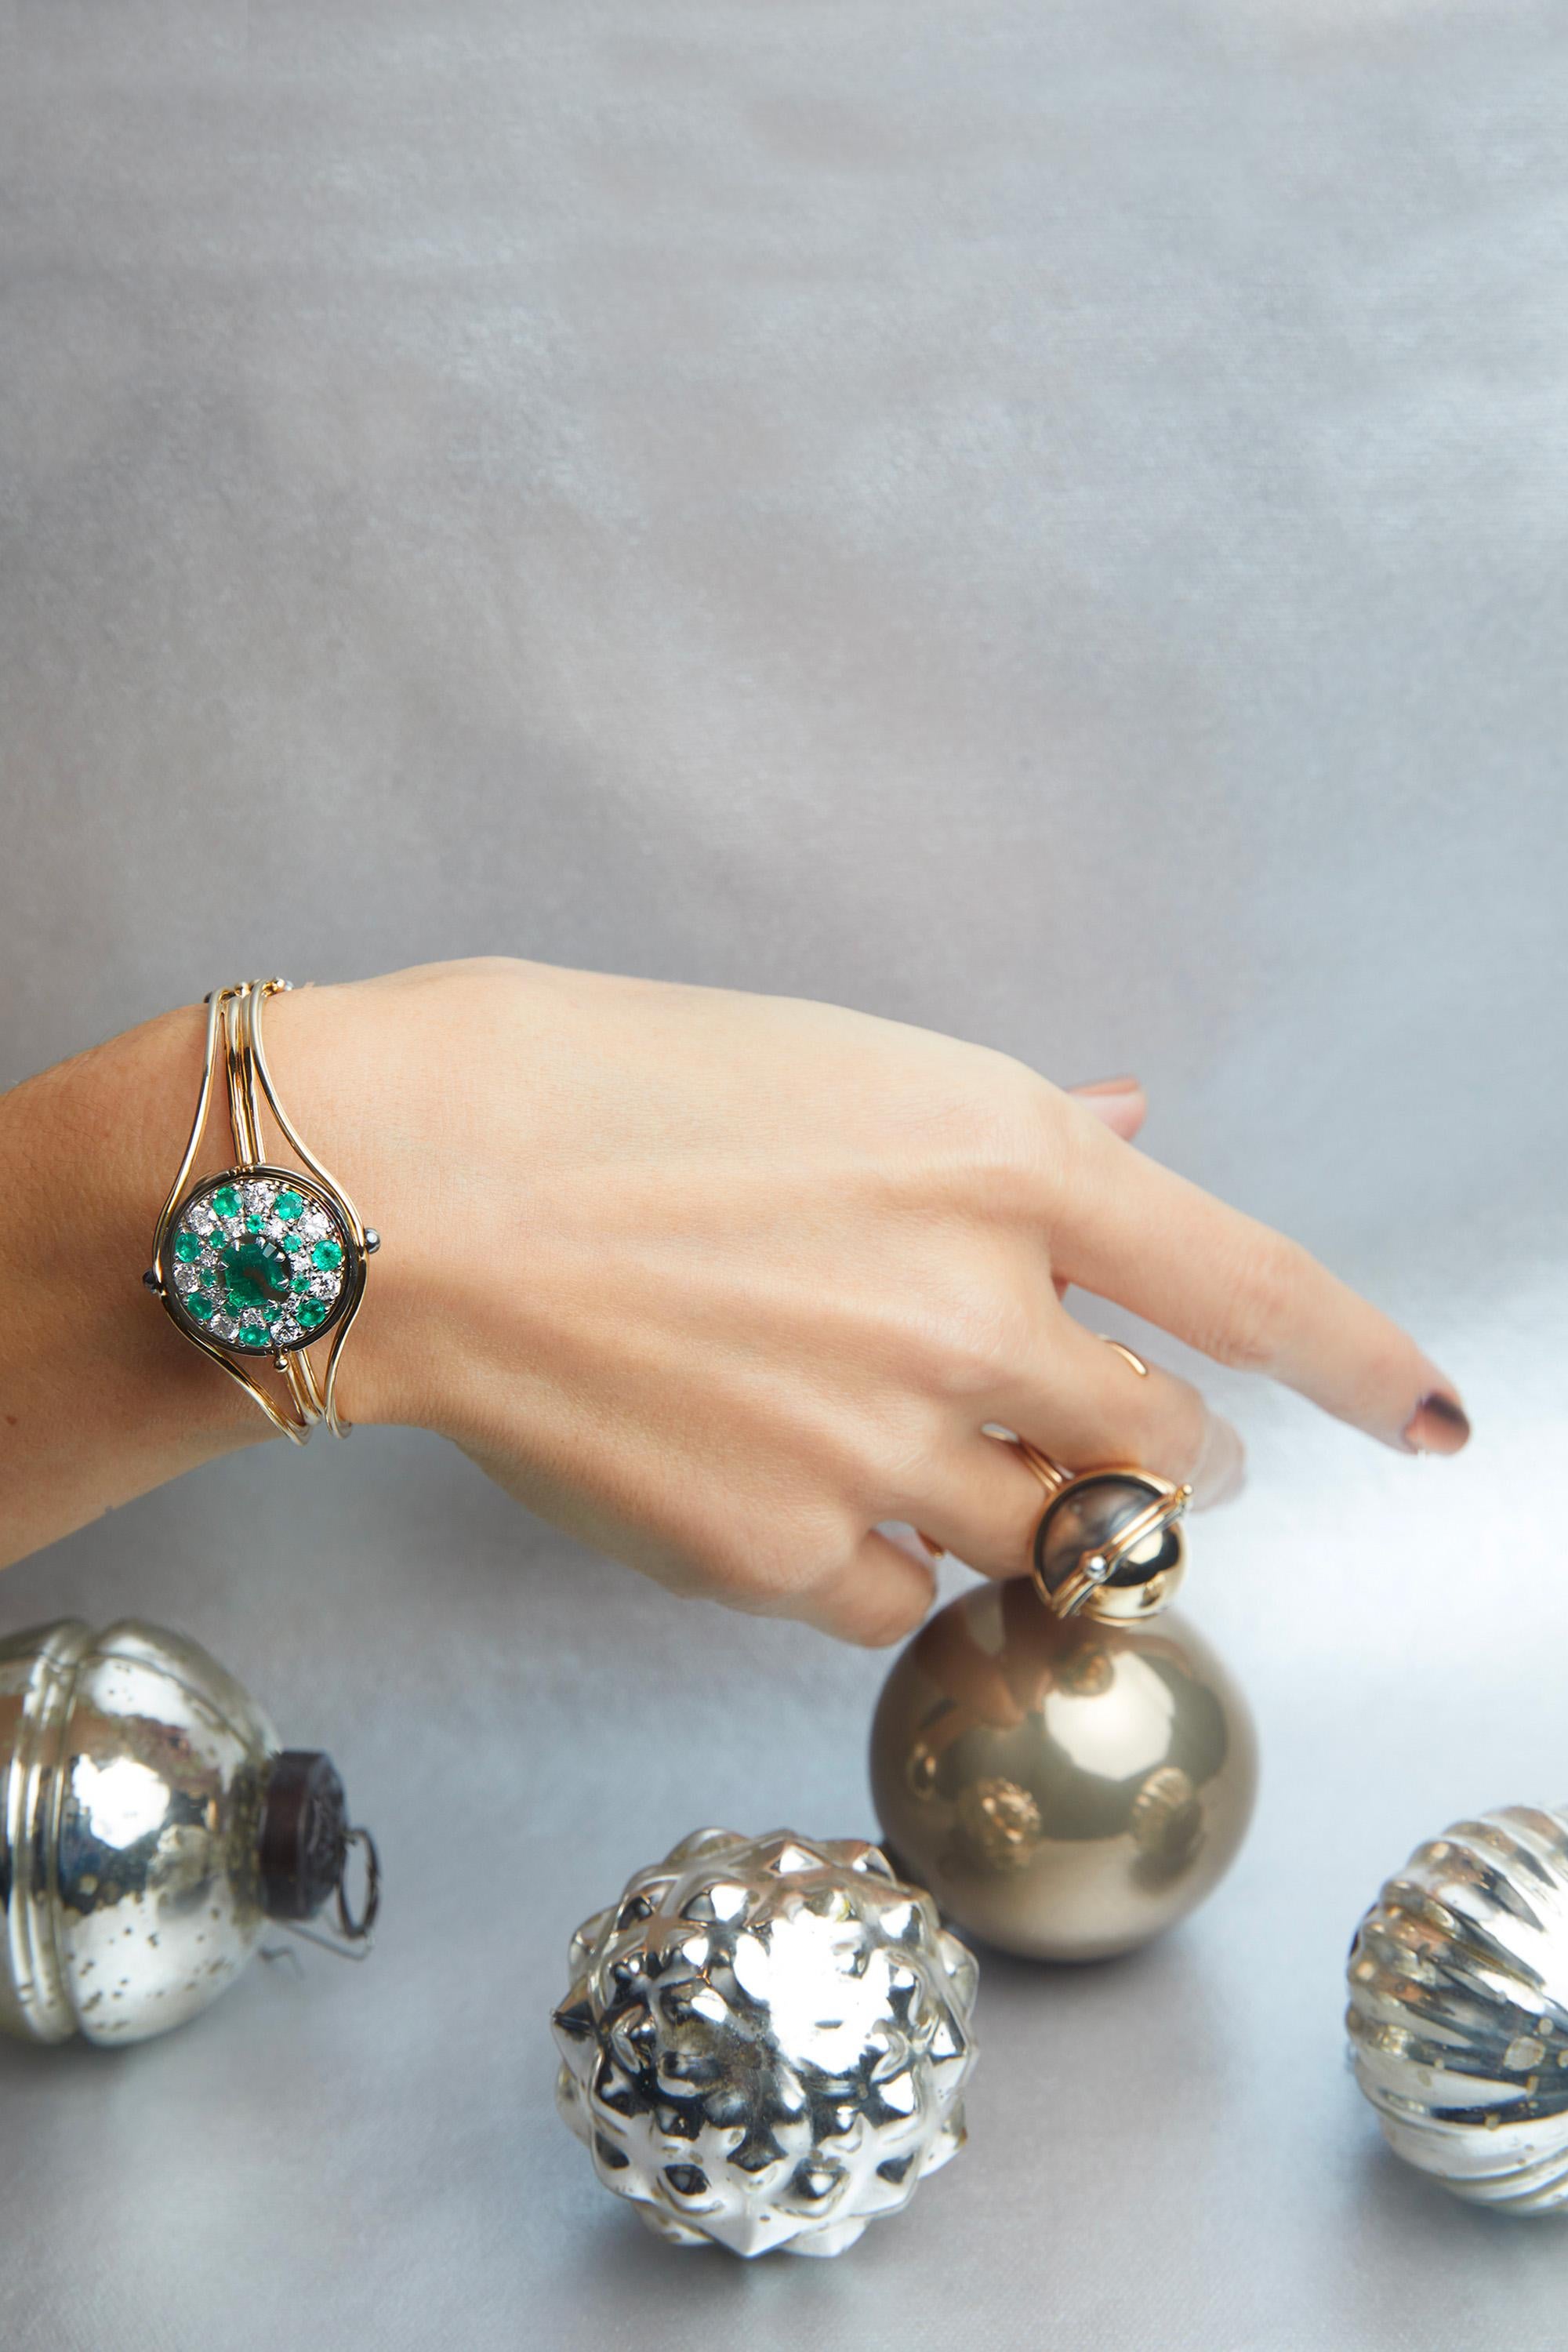 Emerald Sirius Bracelet in 18k Yellow Gold & Distressed Silver by Elie Top In New Condition For Sale In Paris, France